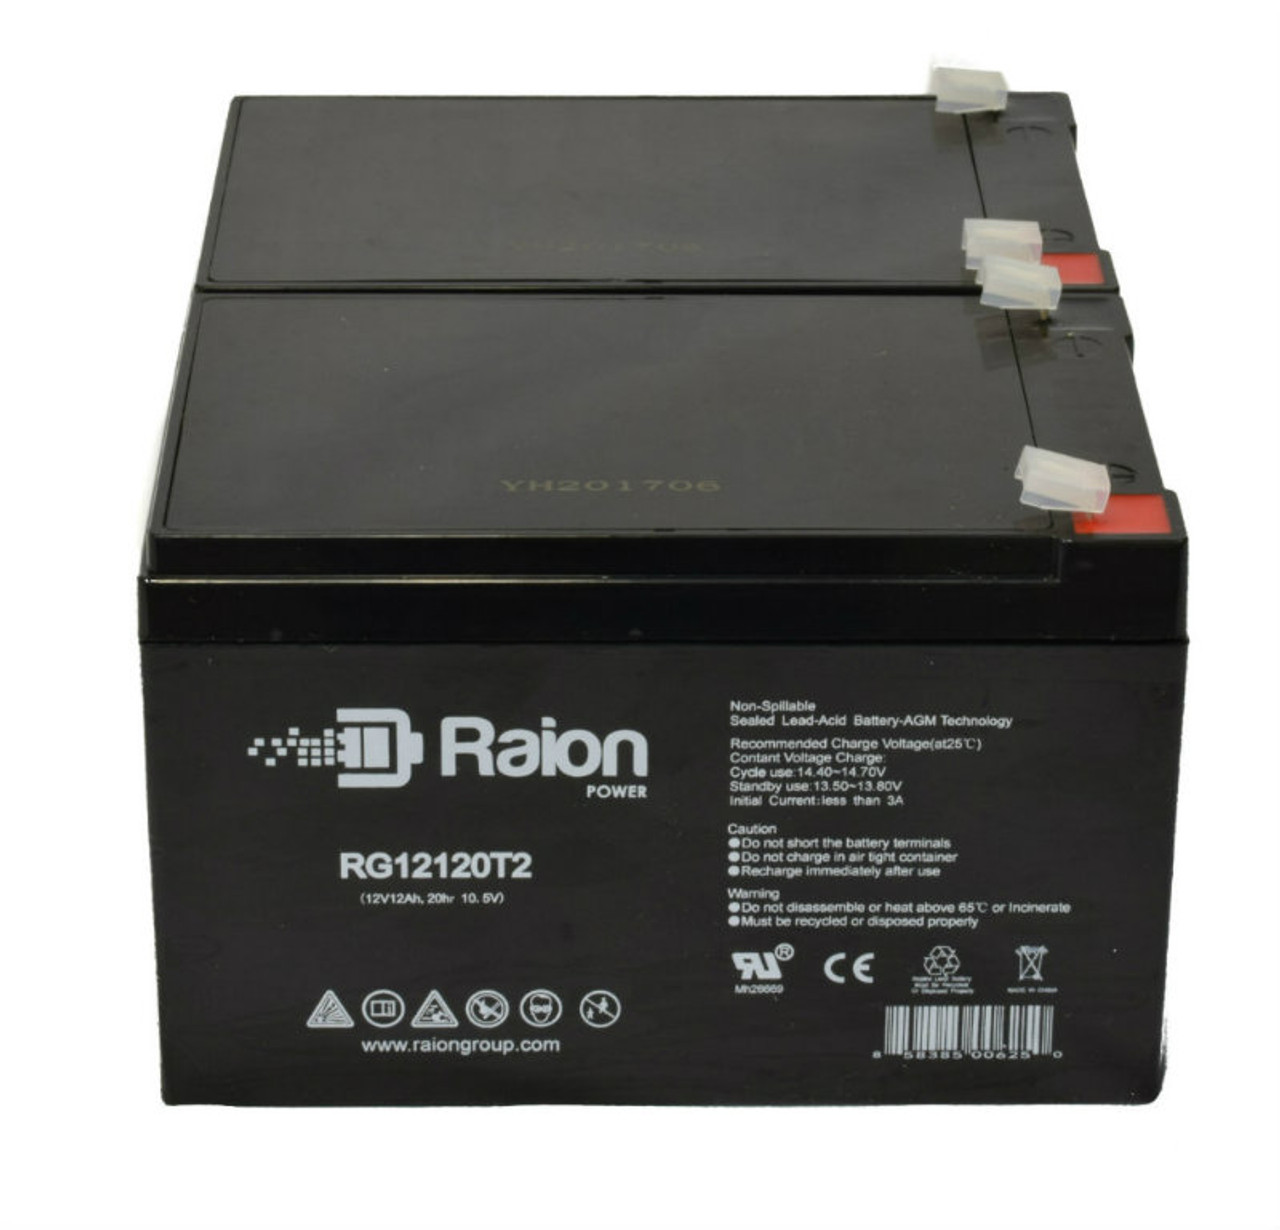 Raion Power RG12120T2 Replacement Battery Set for Electric Mobility Ultralite 350 Mobility Scooter - 2 Pack